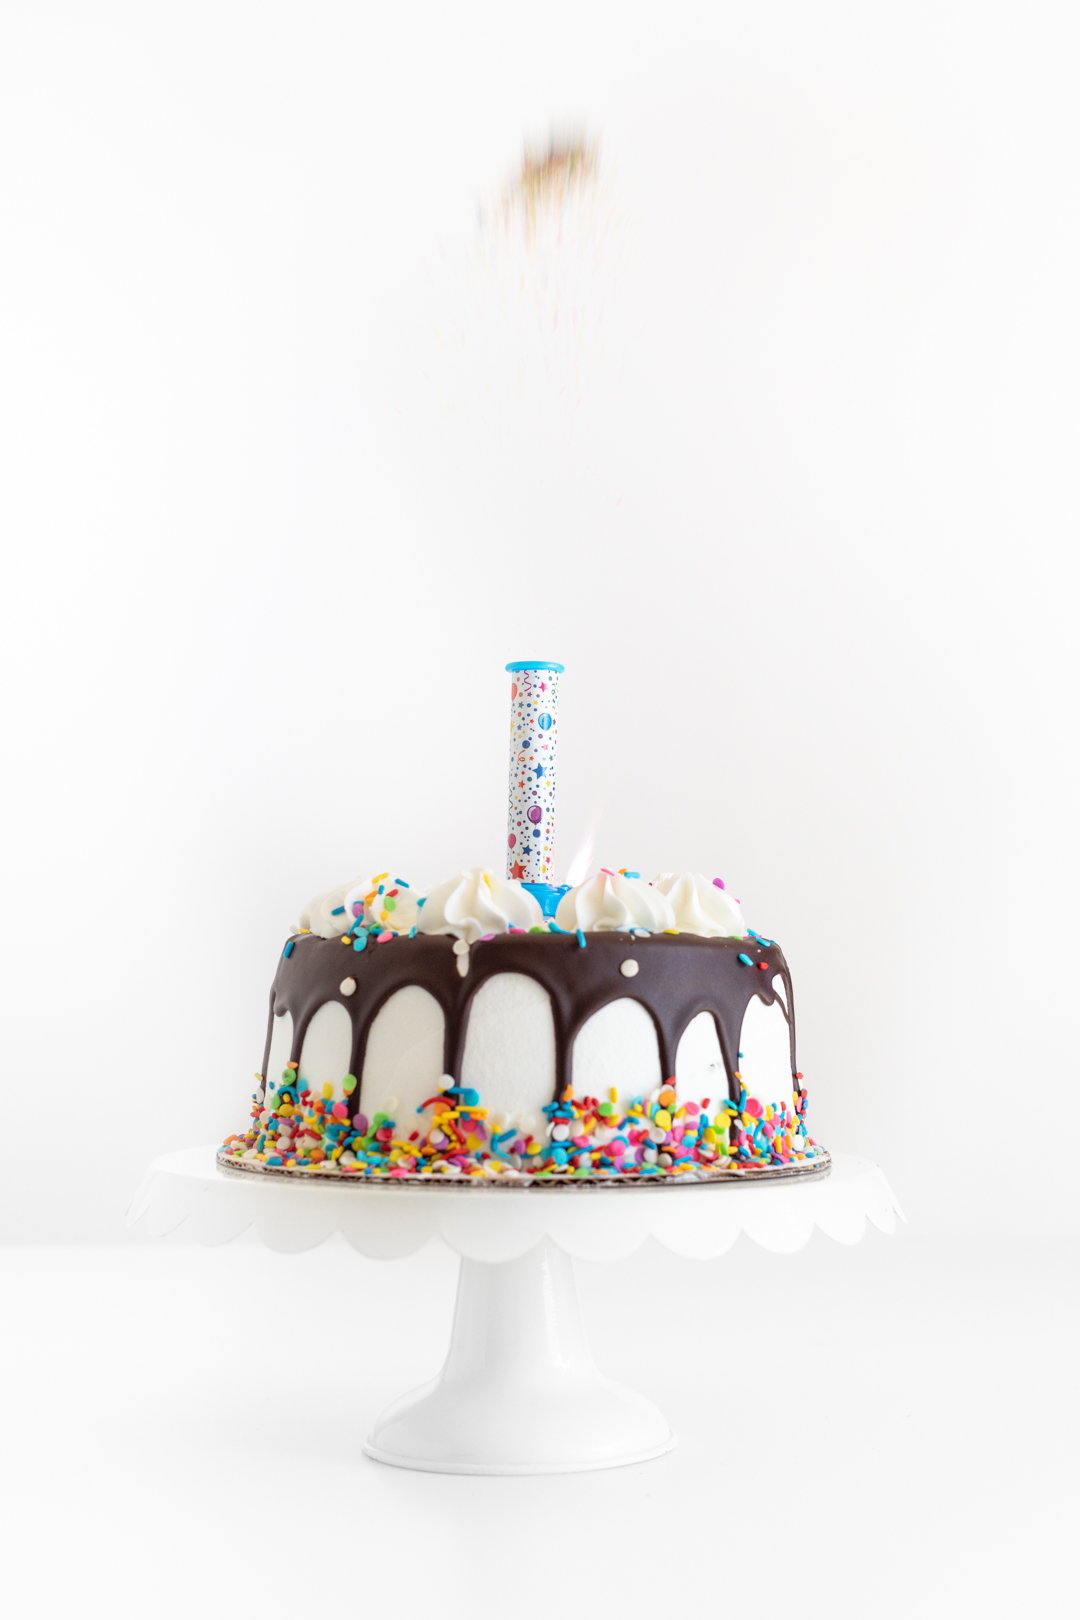 edible confetti popping out of a party popper candle on a birthday cake